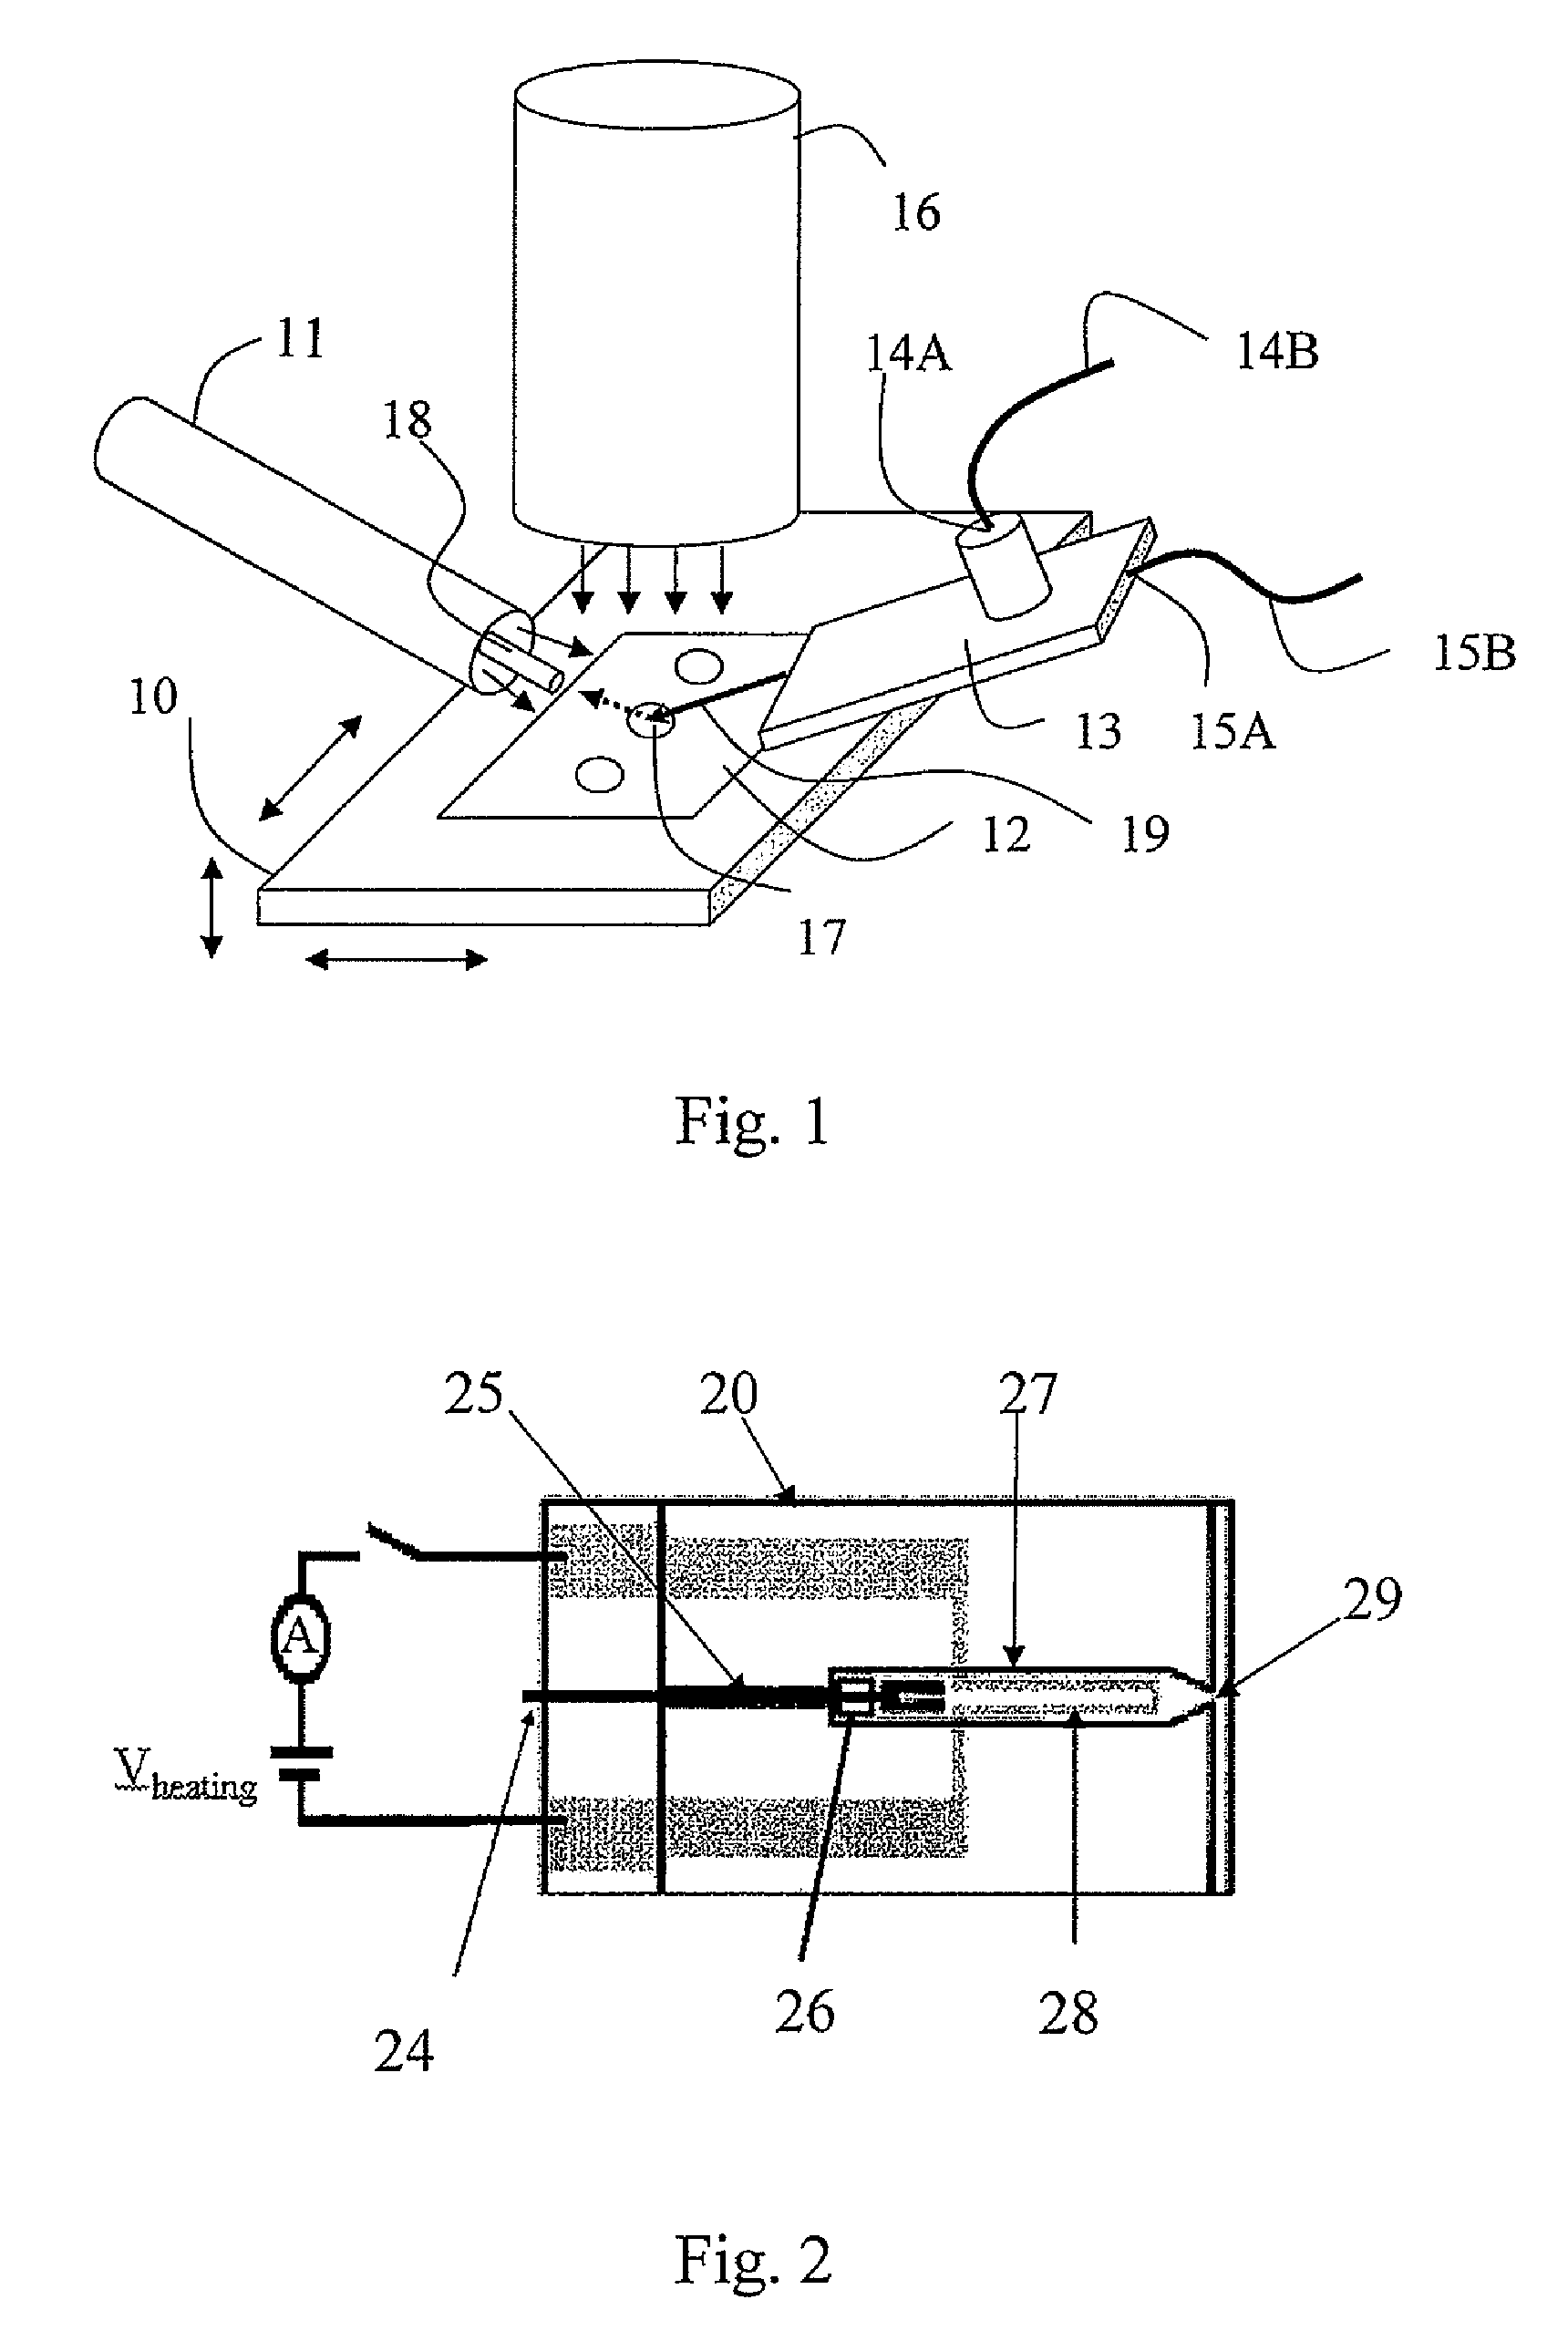 Method and system for desorbing and ionizing chemical compounds from surfaces